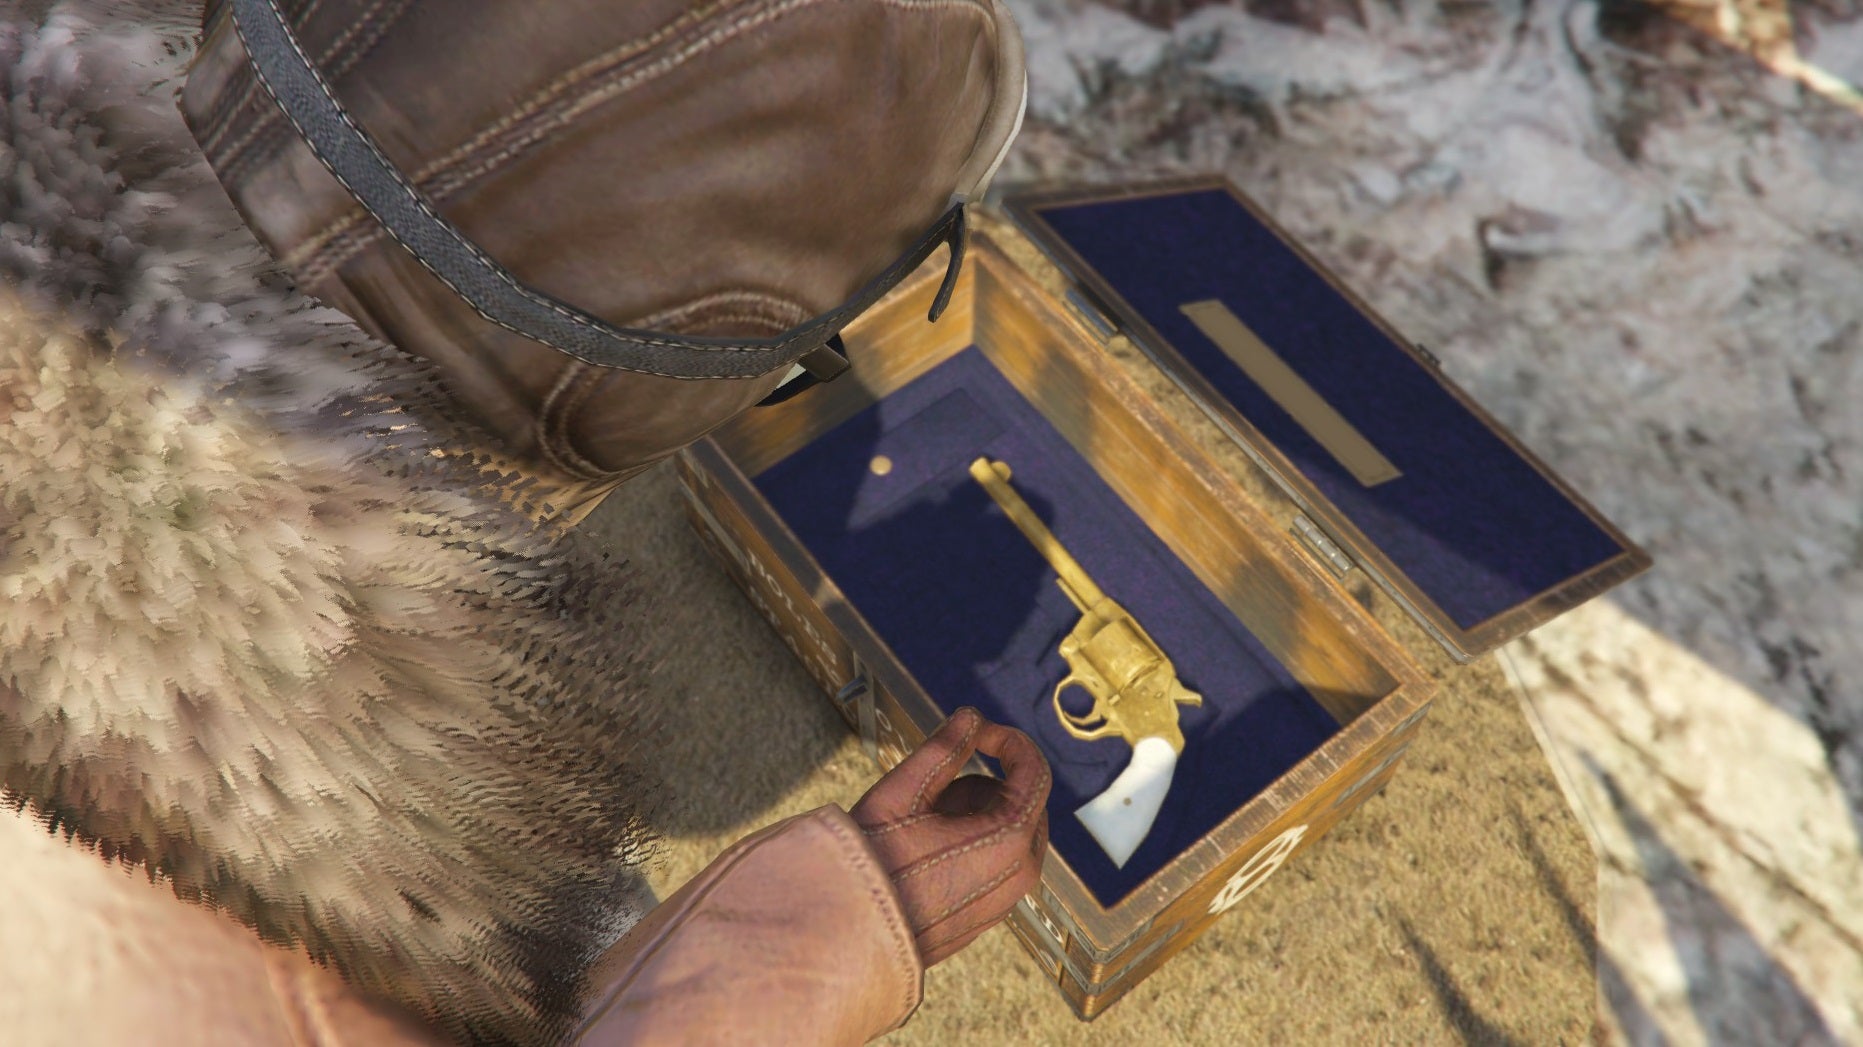 Image for GTA Online: How to Complete the Treasure Hunt and Get the Gold Double Action Revolver